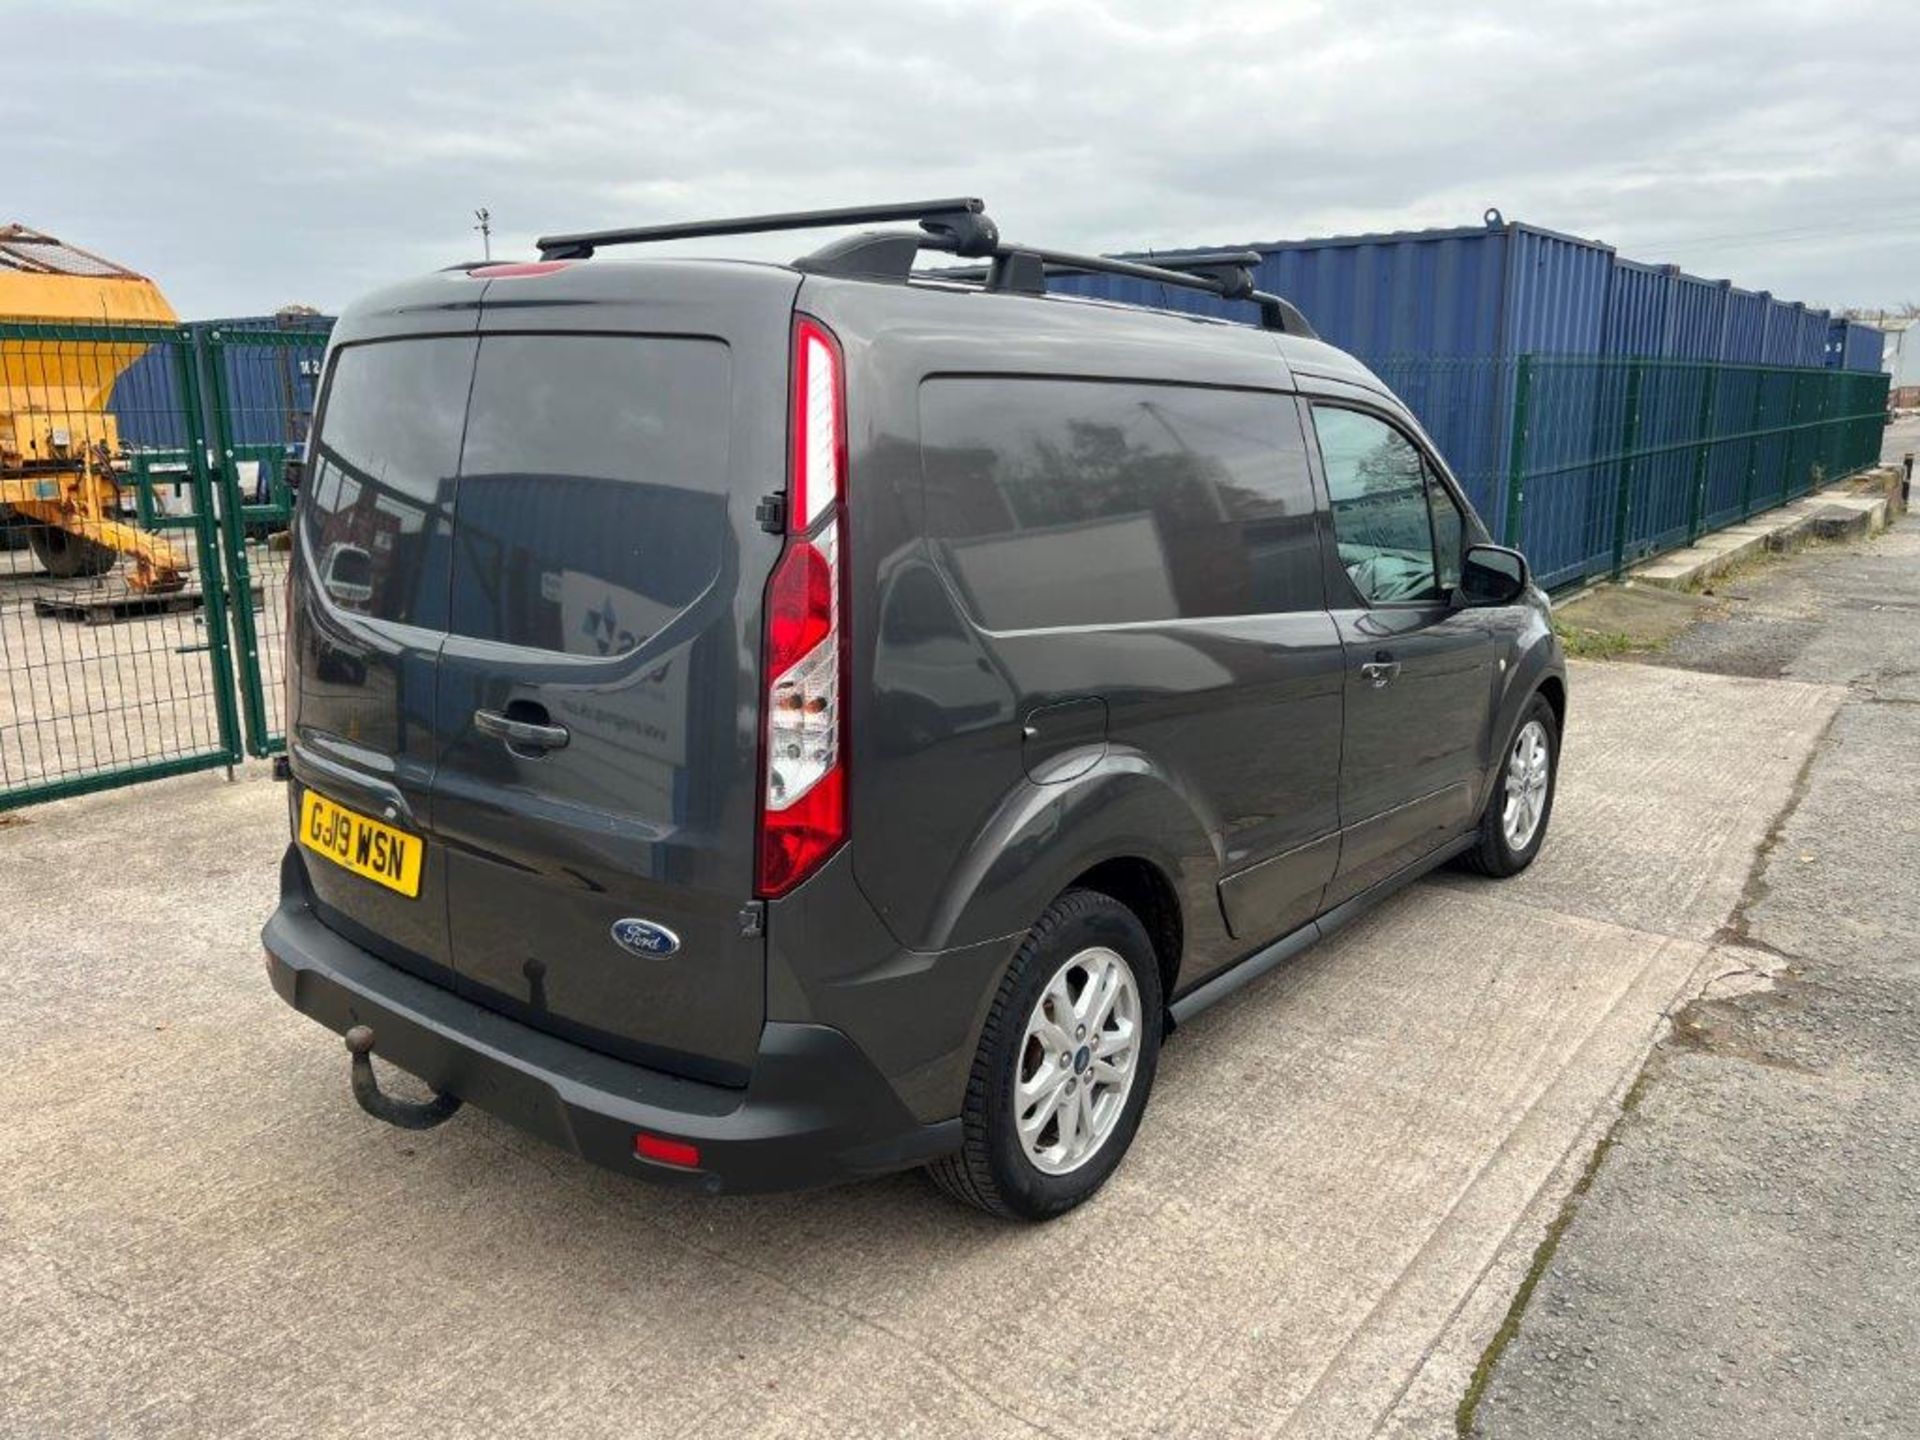 Ford Transit Connect 200 LTD TDCI Auto, Euro 6, 2019, facelift dash/screen - Image 6 of 16